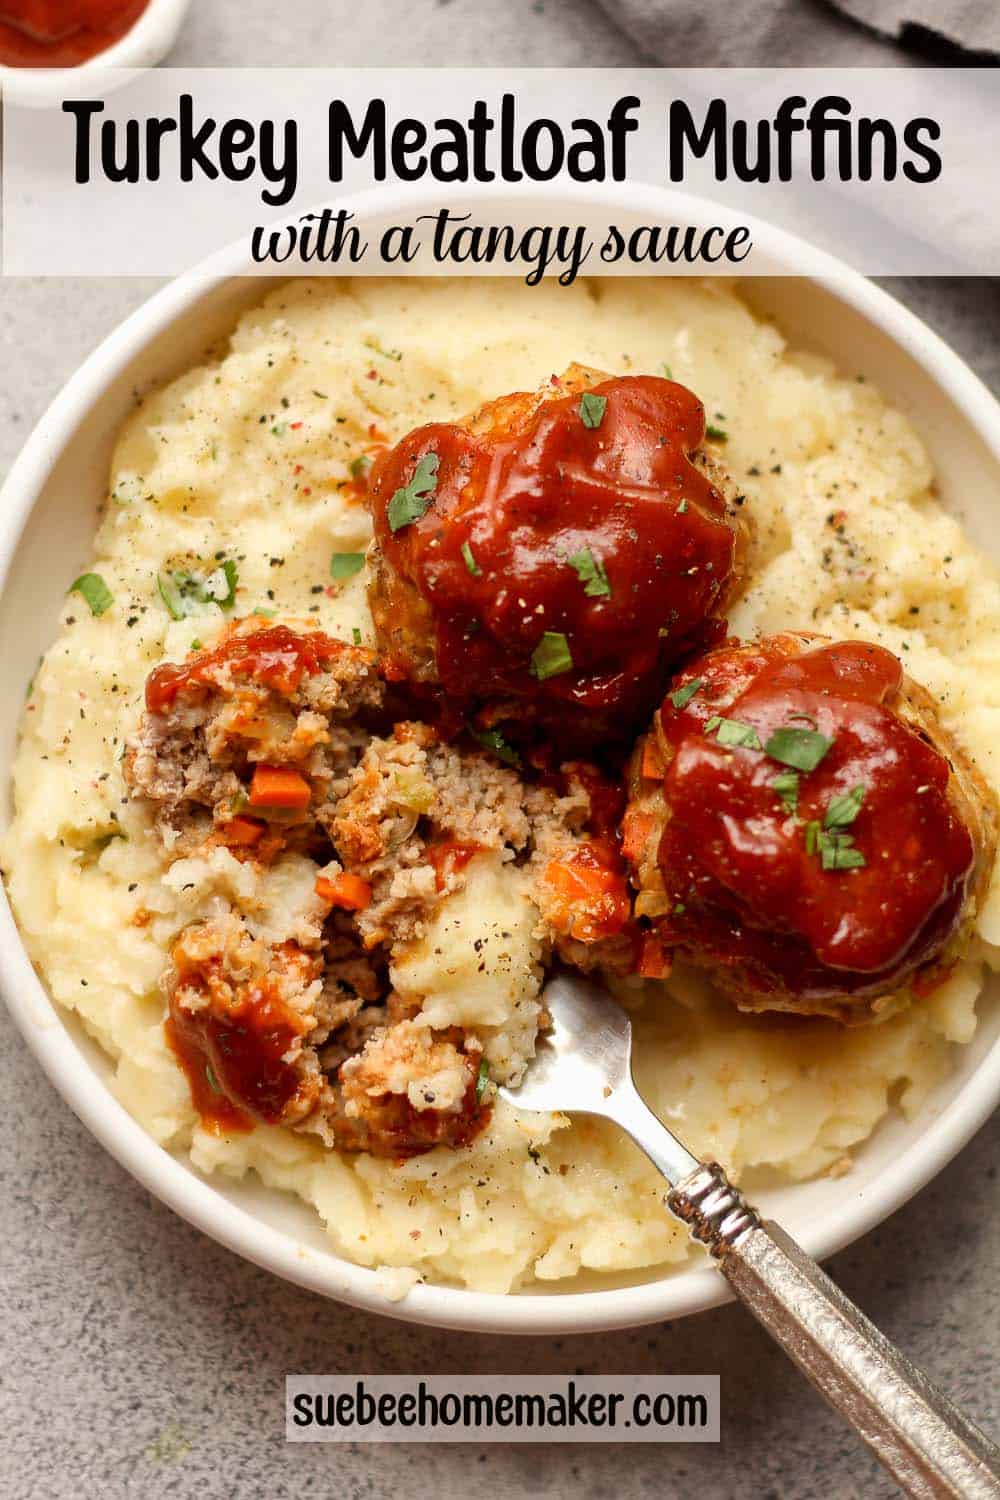 Some turkey meatloaf muffins with a tangy sauce over mashed potatoes.